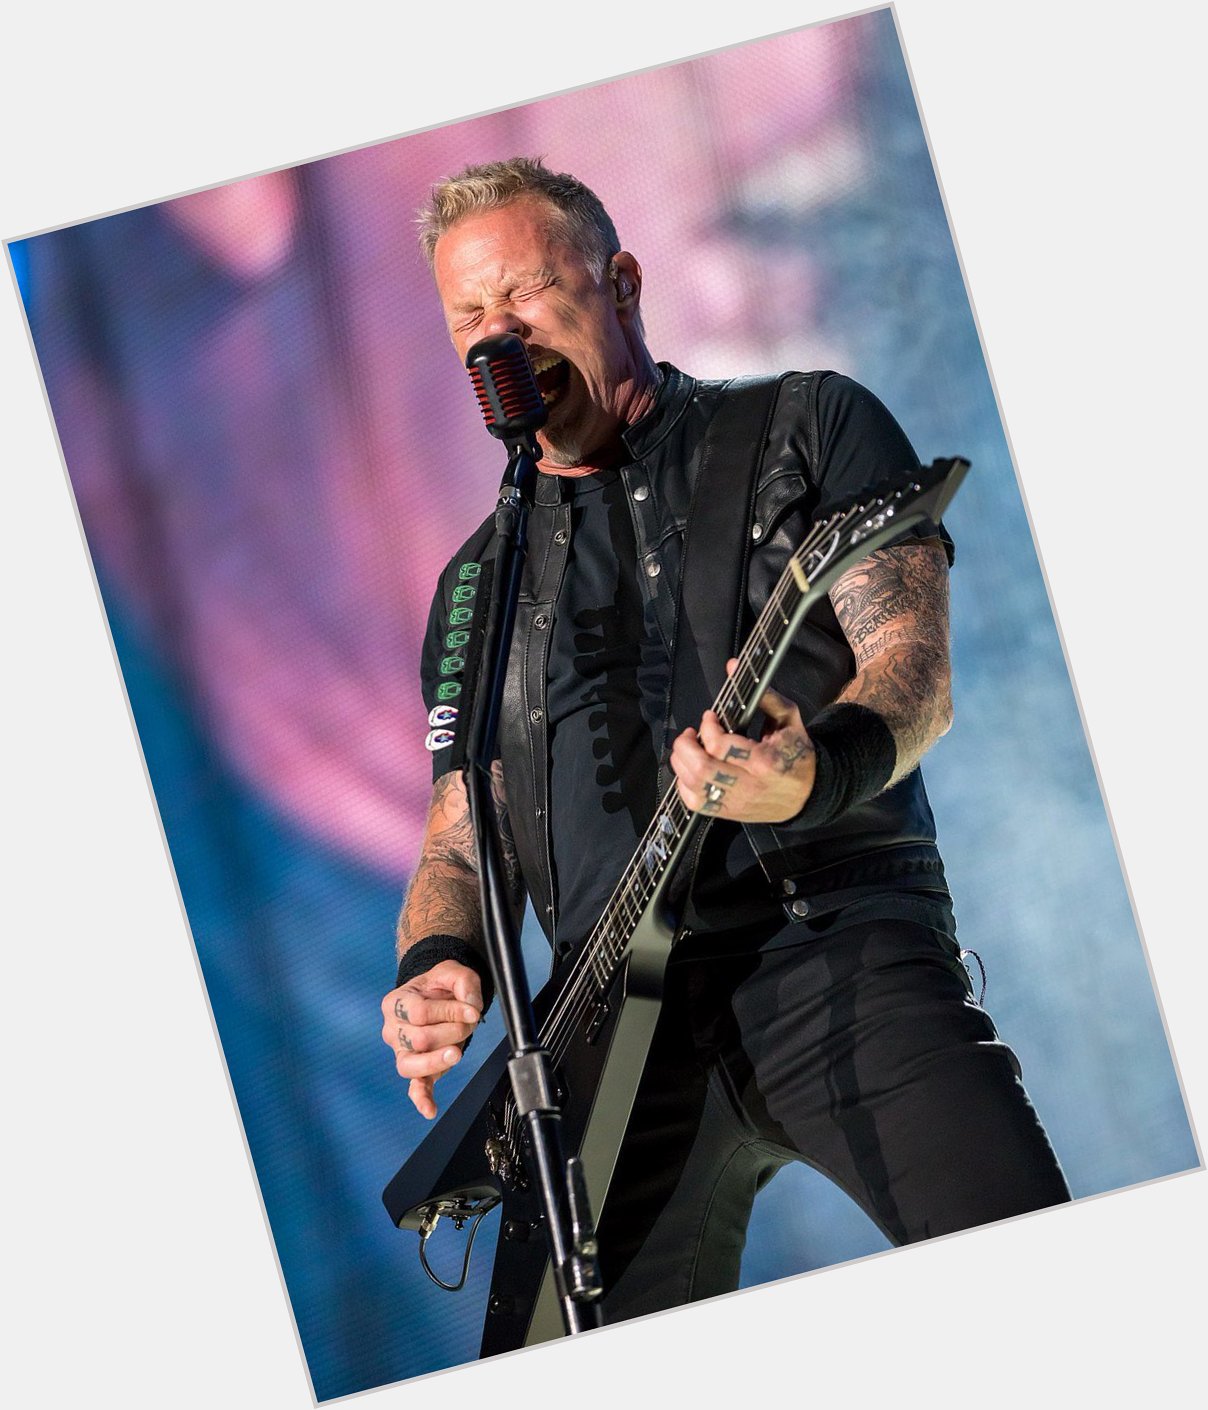 Happy birthday to the fastest right hand in metal. James Hetfield!  